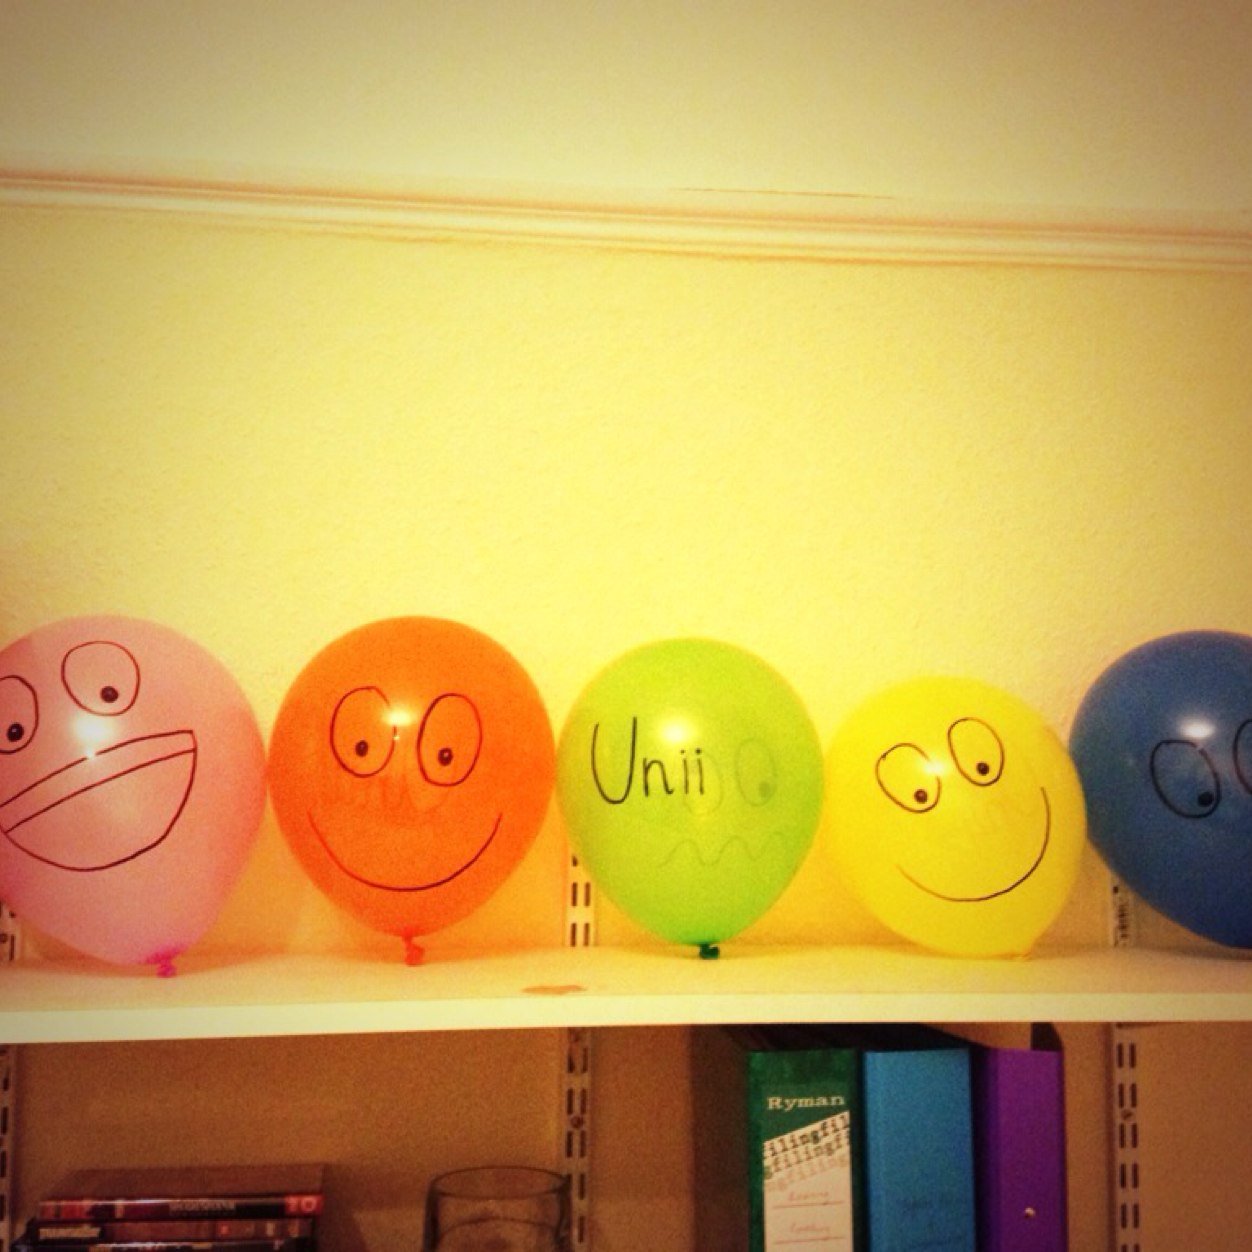 Improving the world one Balloon at a time. @UniiUK